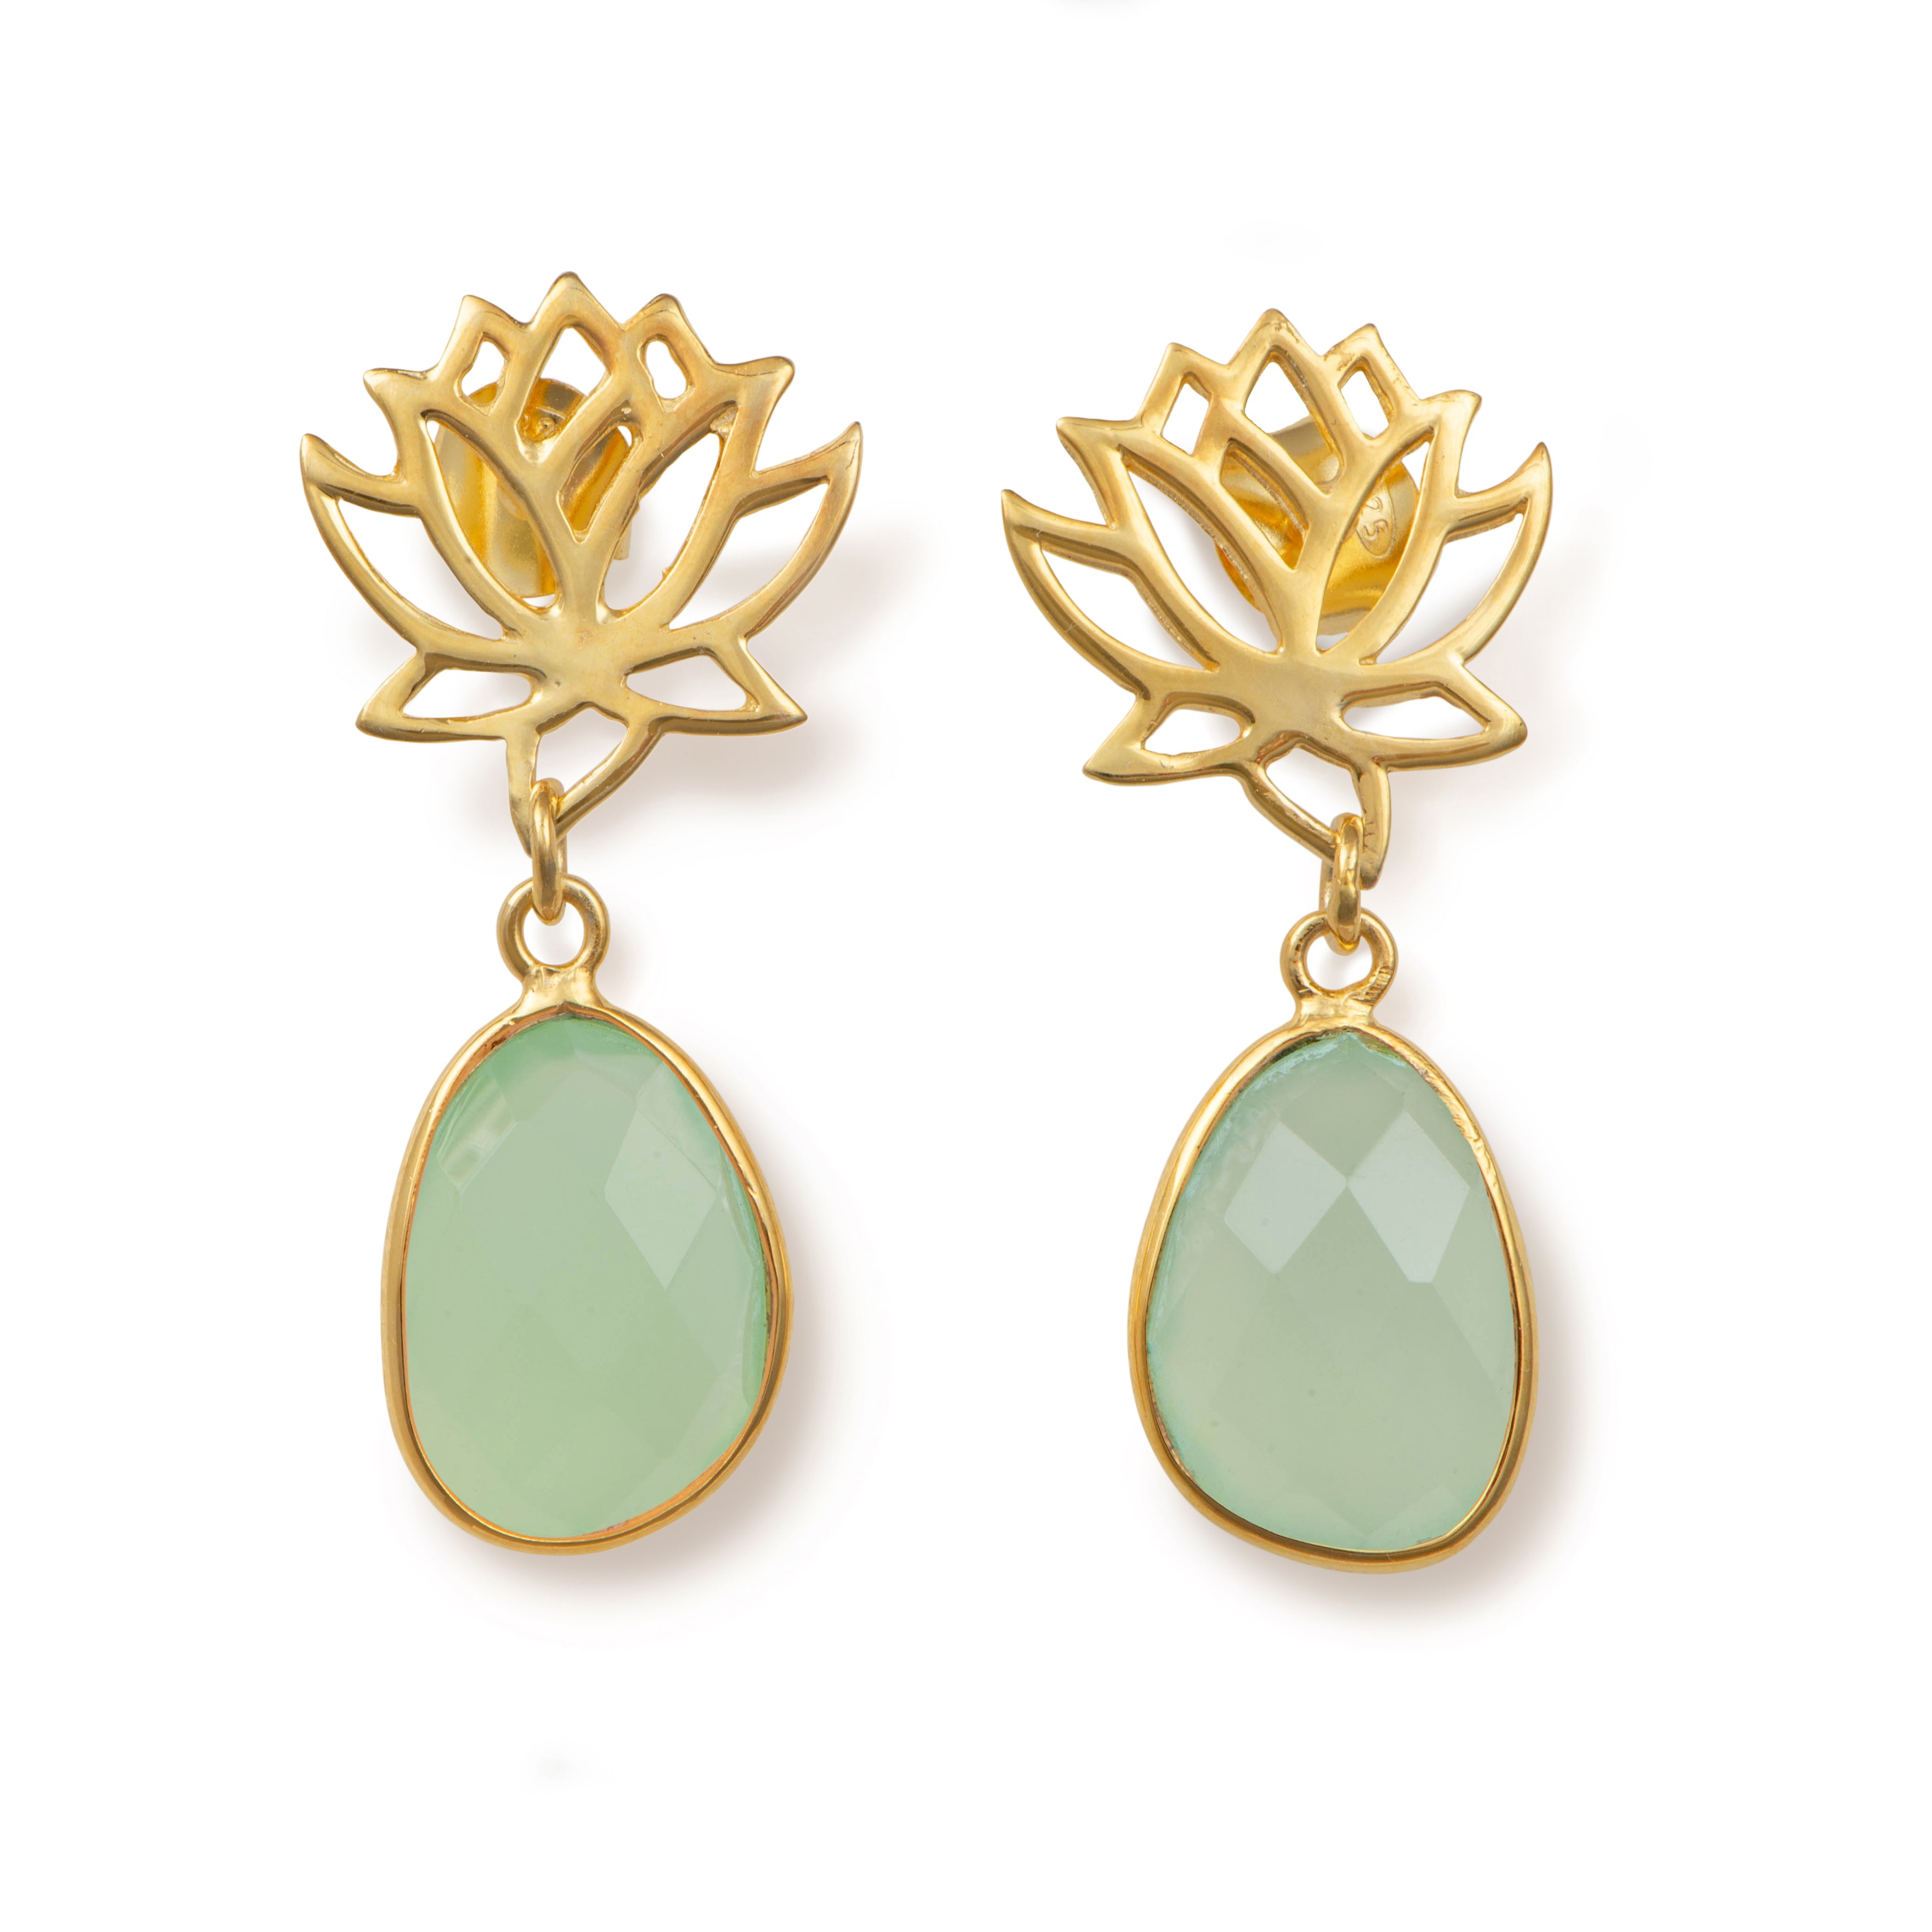 Lotus Earrings in Gold Plated Sterling Silver with a Green Chalcedony Gemstone Drop